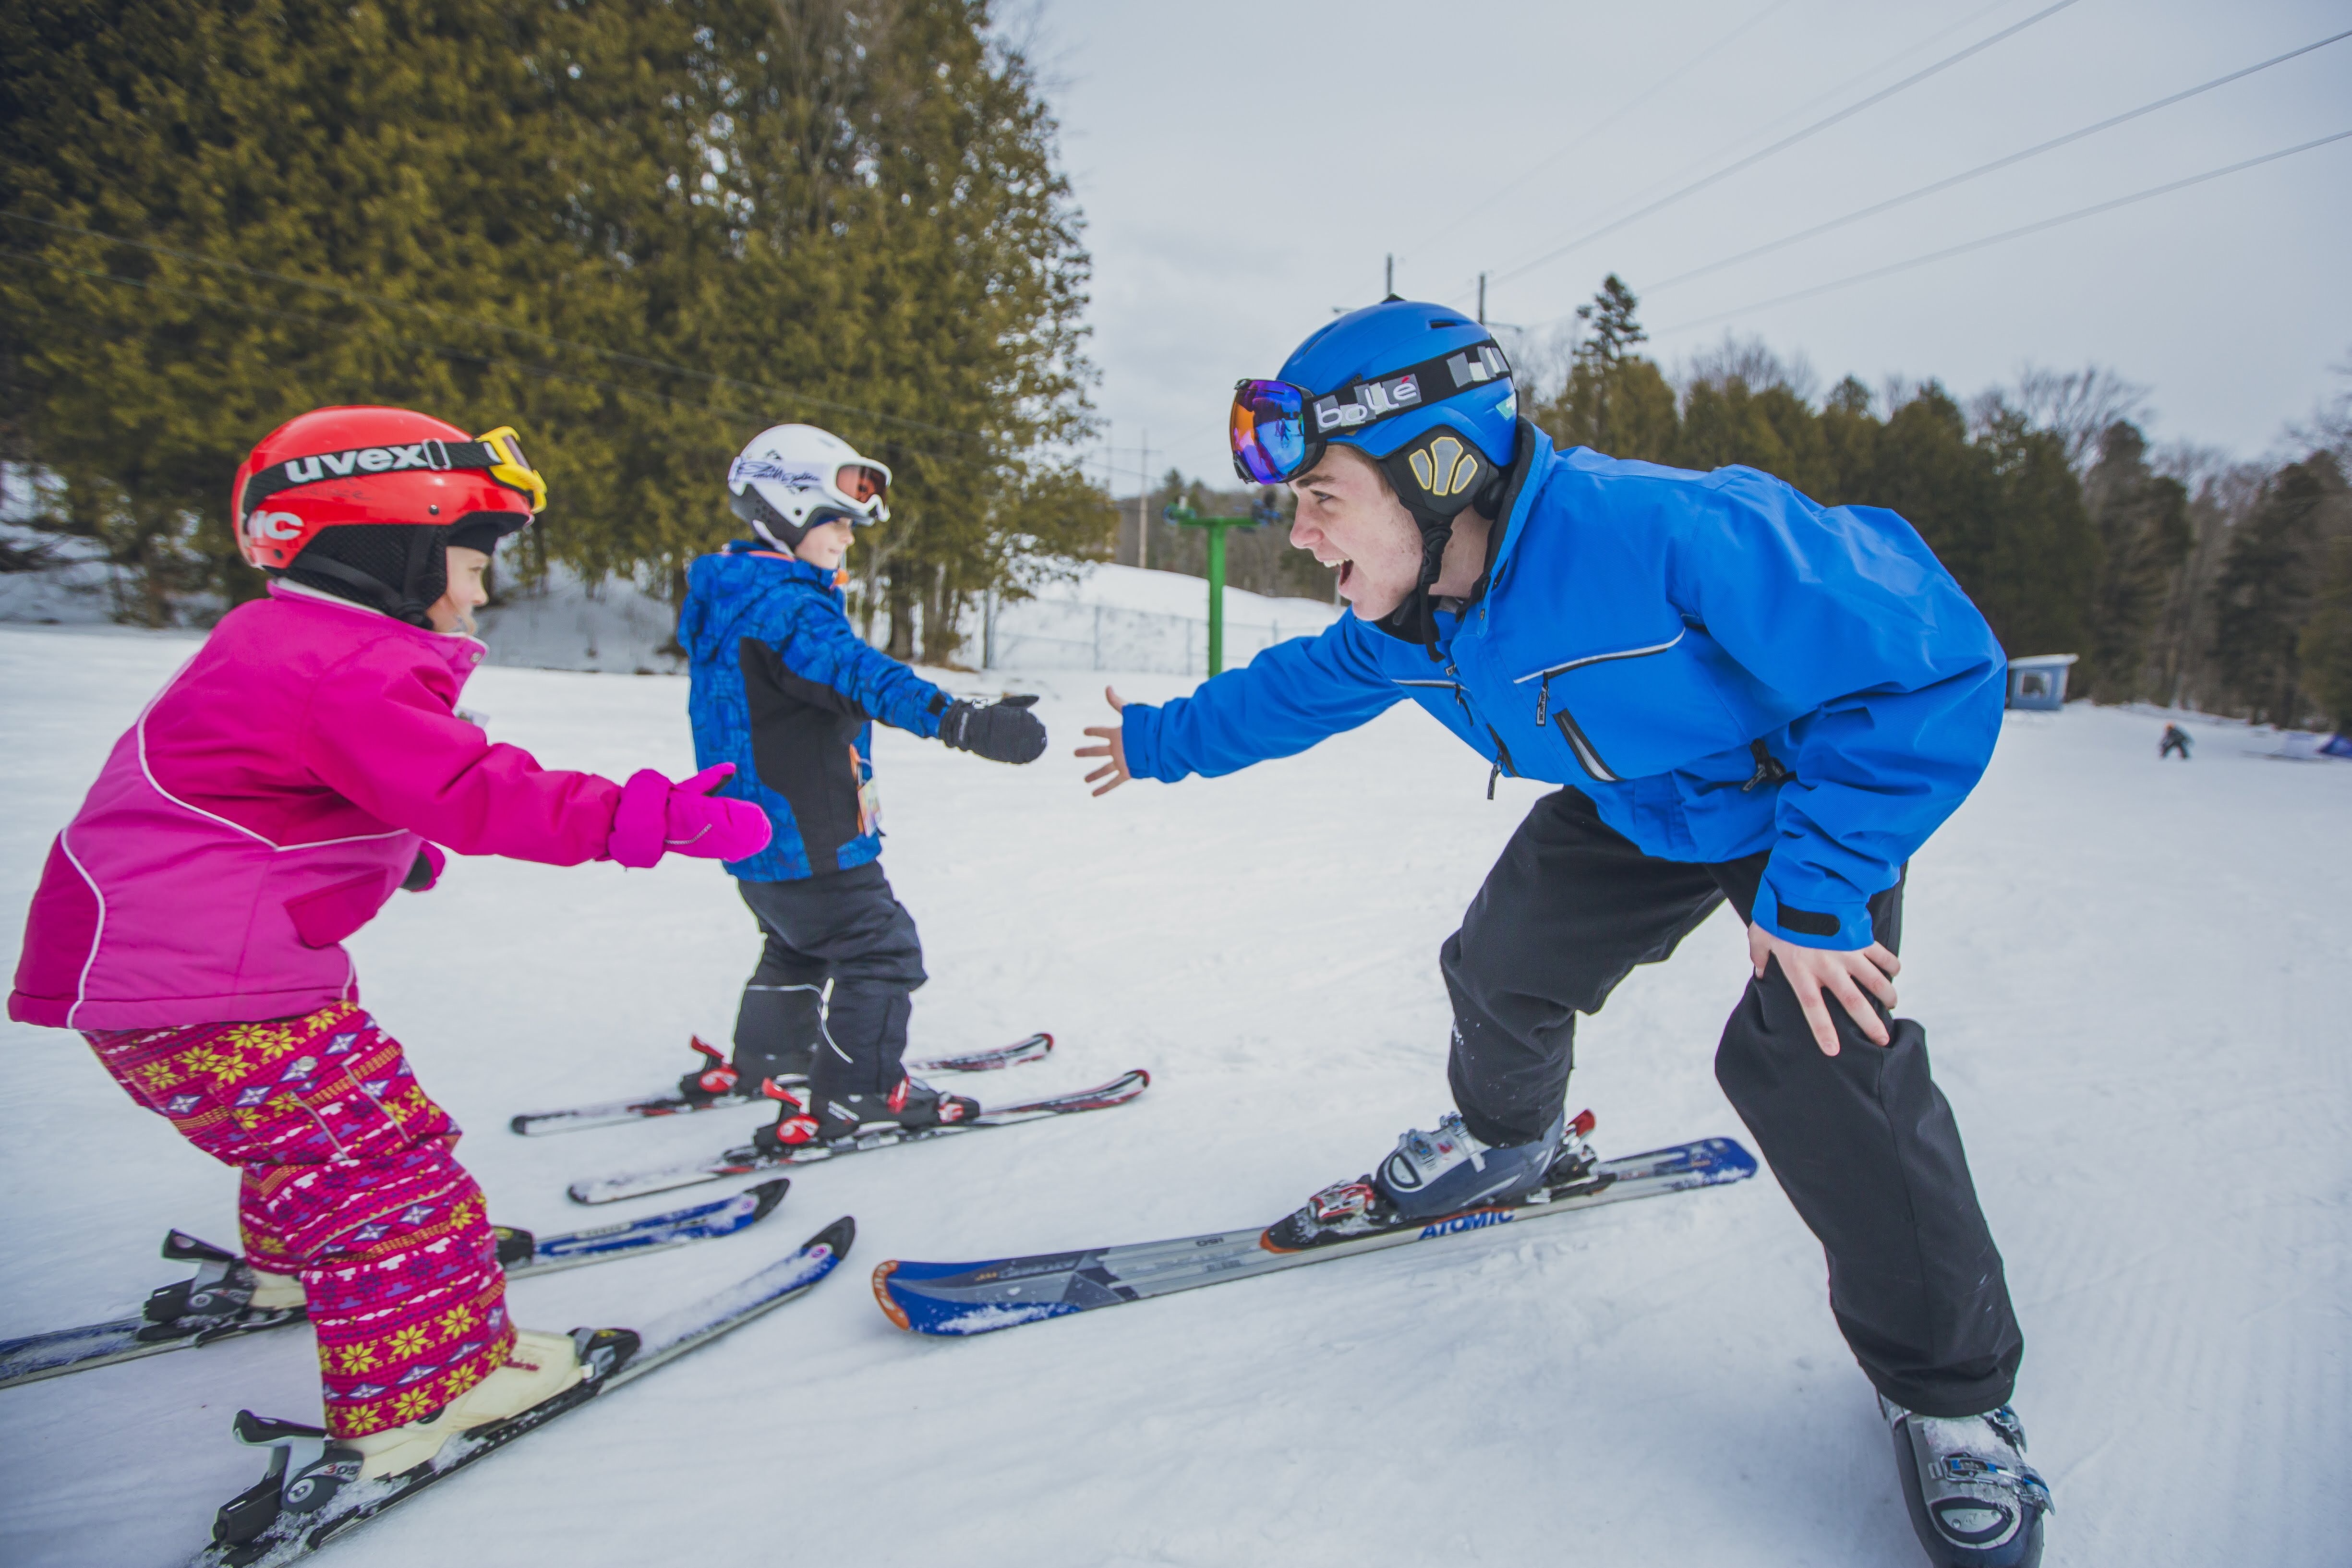 a child in a pink snowsuit and ski gear high-fives their smiling ski coach on a ski hill 